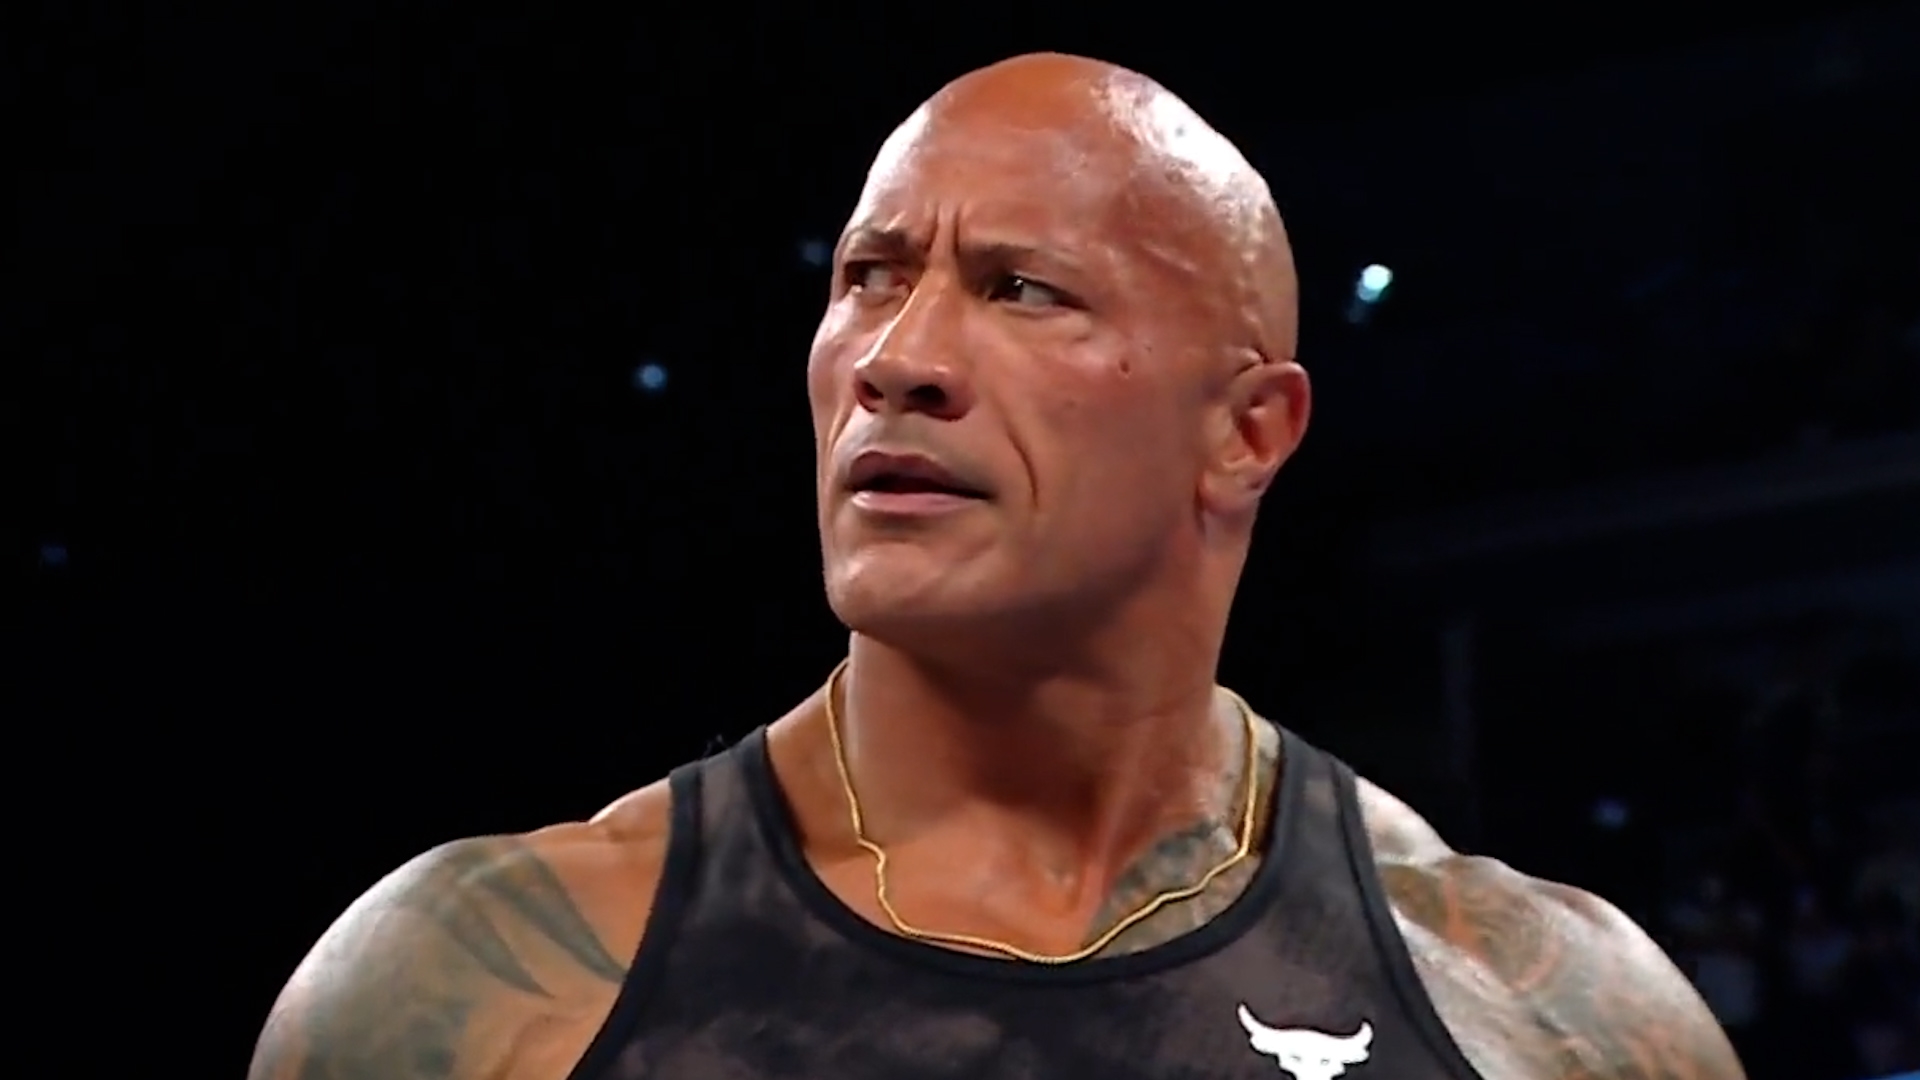 Dwayne 'The Rock' Johnson emerges as a shock candidate to buy WWE